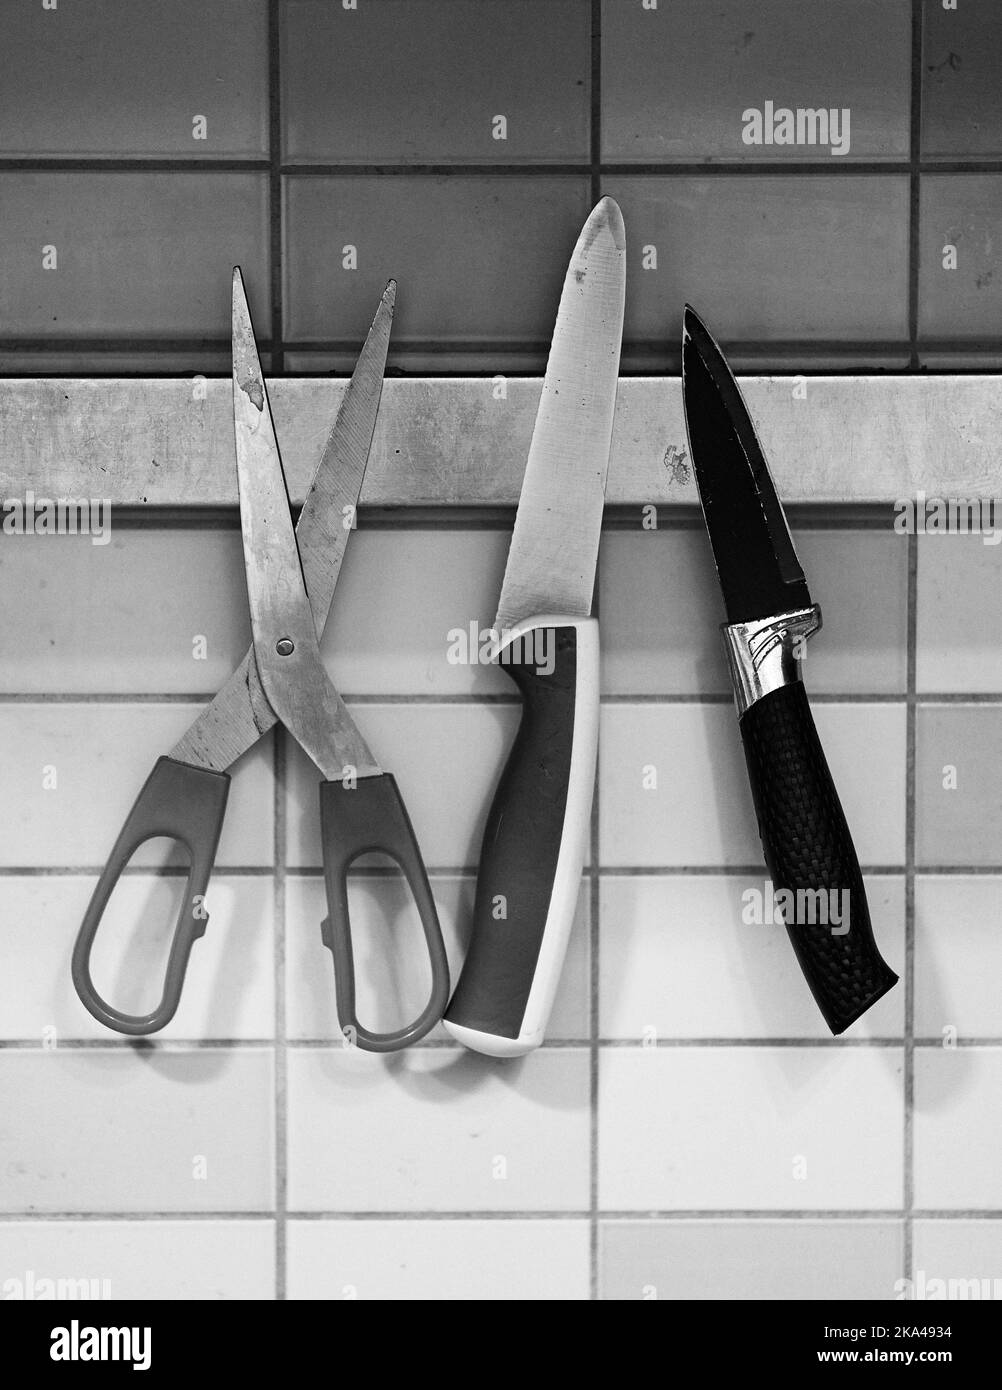 A grayscale shot of scissors and two kitchen knives hanging on the wall Stock Photo